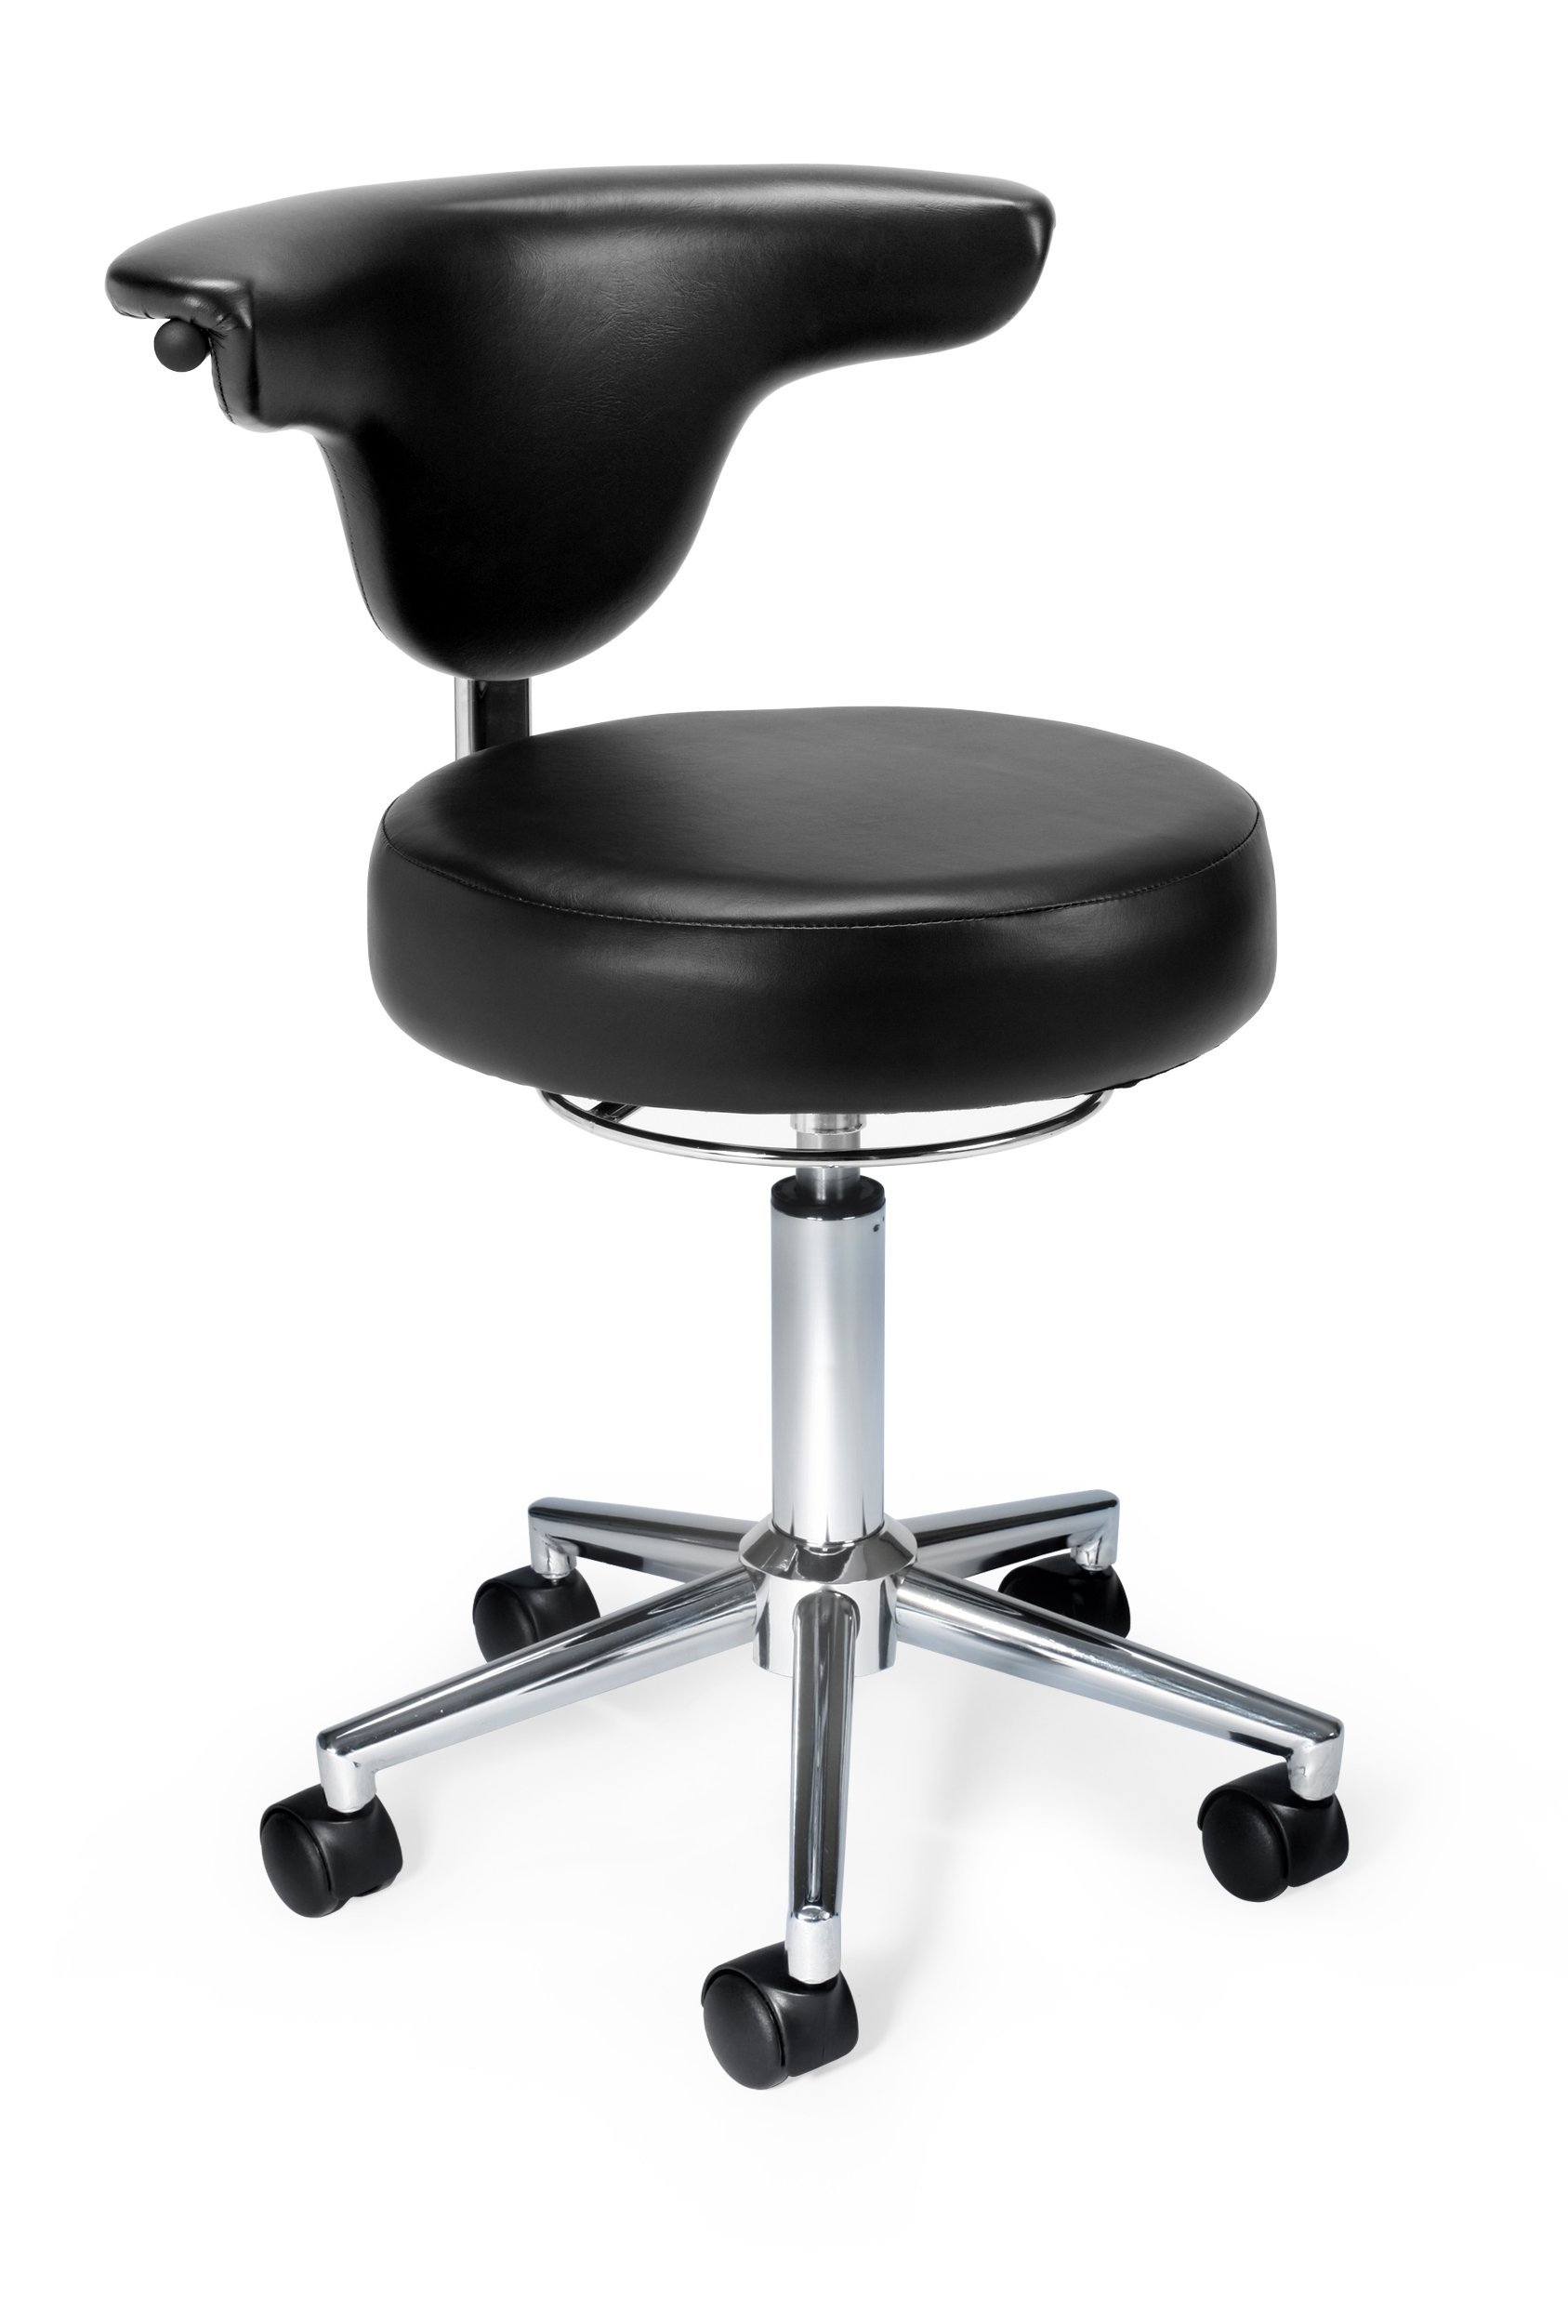 The OFM 910 Anatomy Chair 